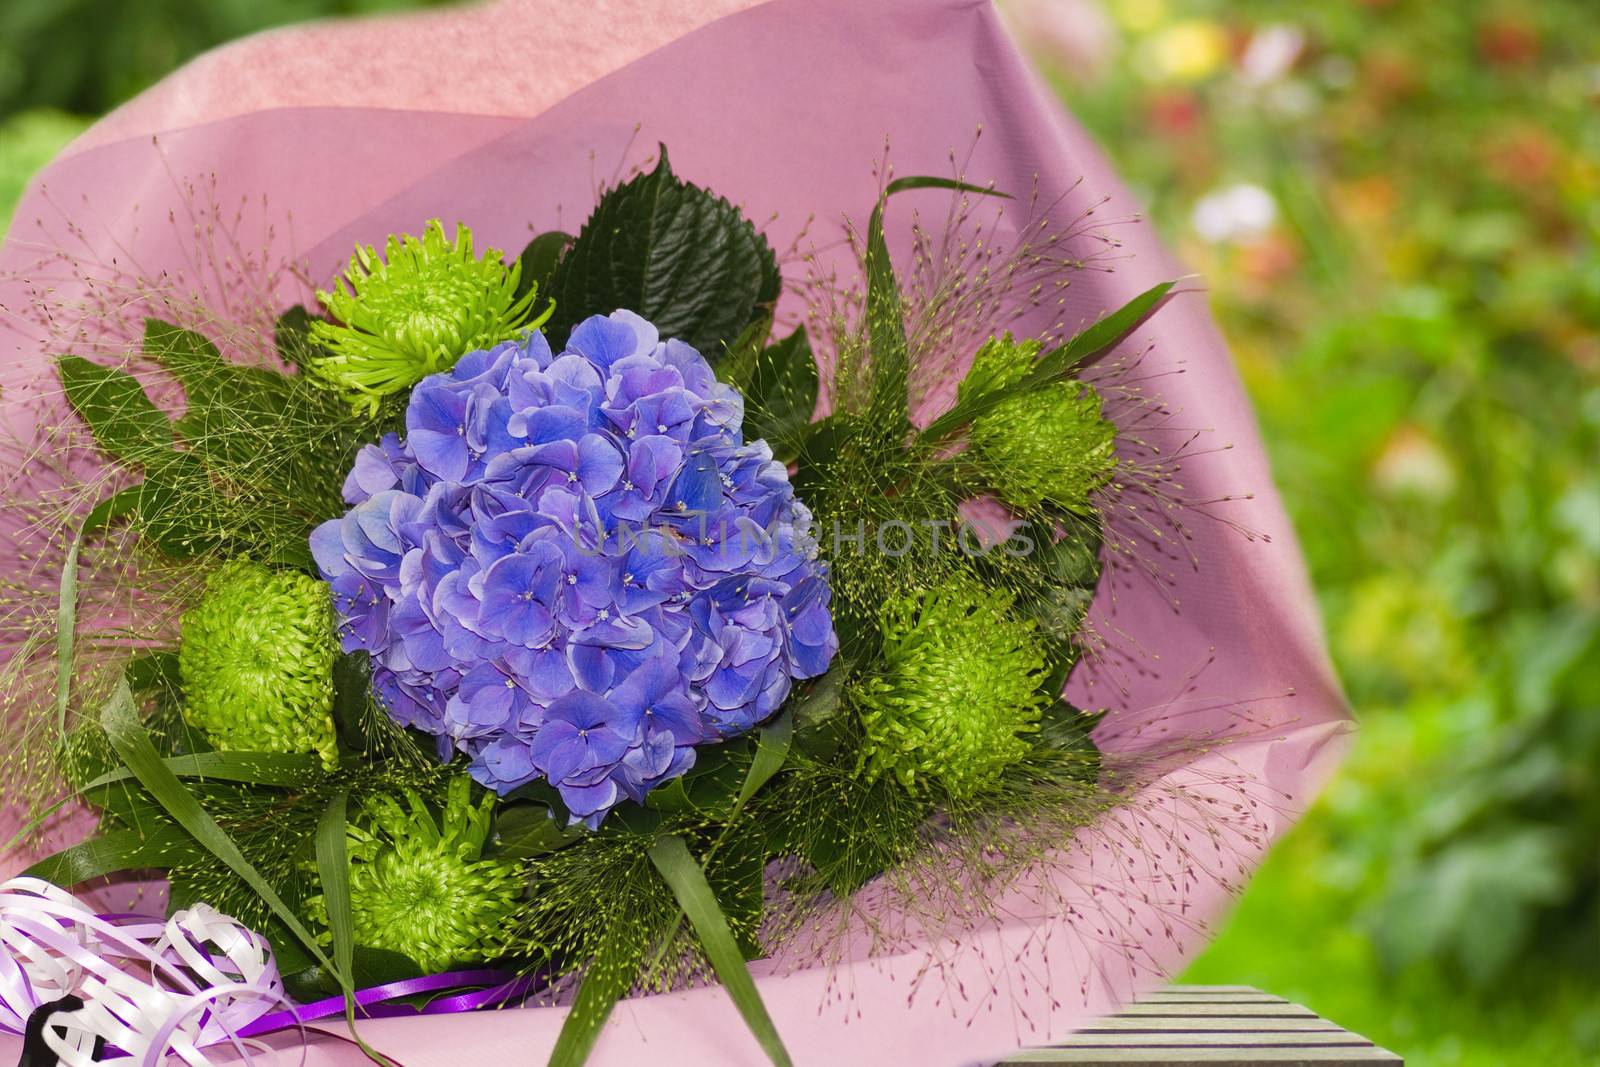 Blue and green bouquet of flowers wrapped in paper with summer garden background